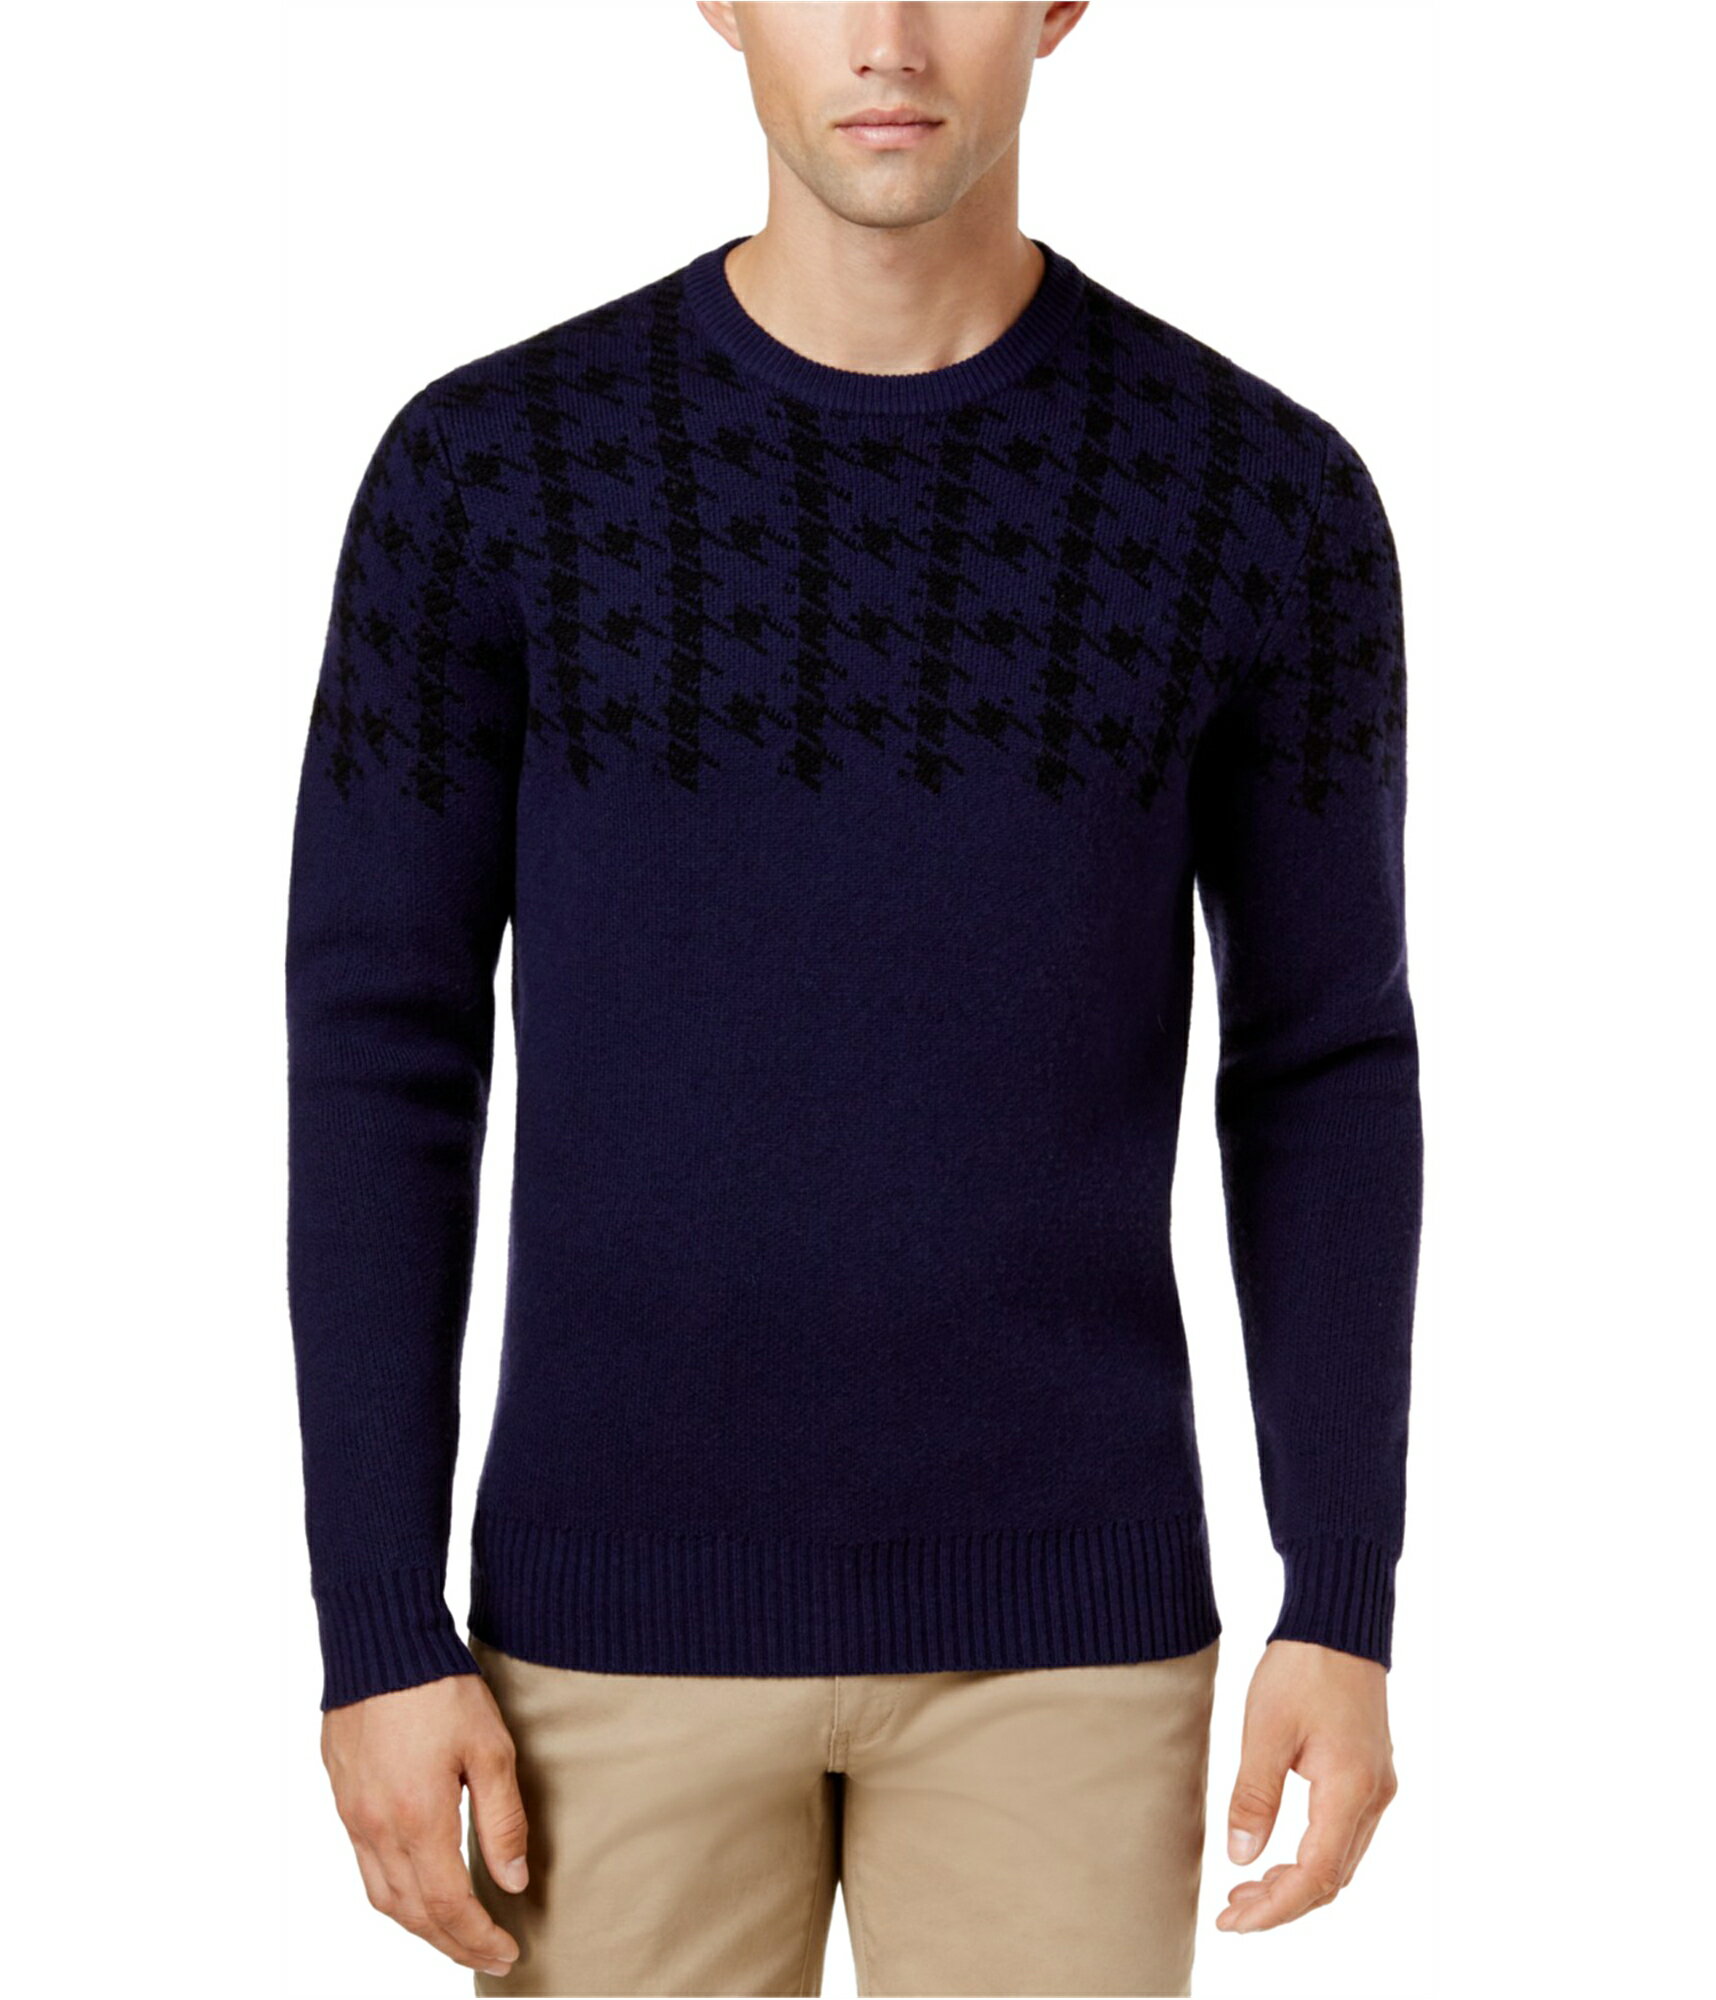 Ben Sherman Mens Houndstooth Knit Sweater sold by Tags Weekly | Rakuten ...